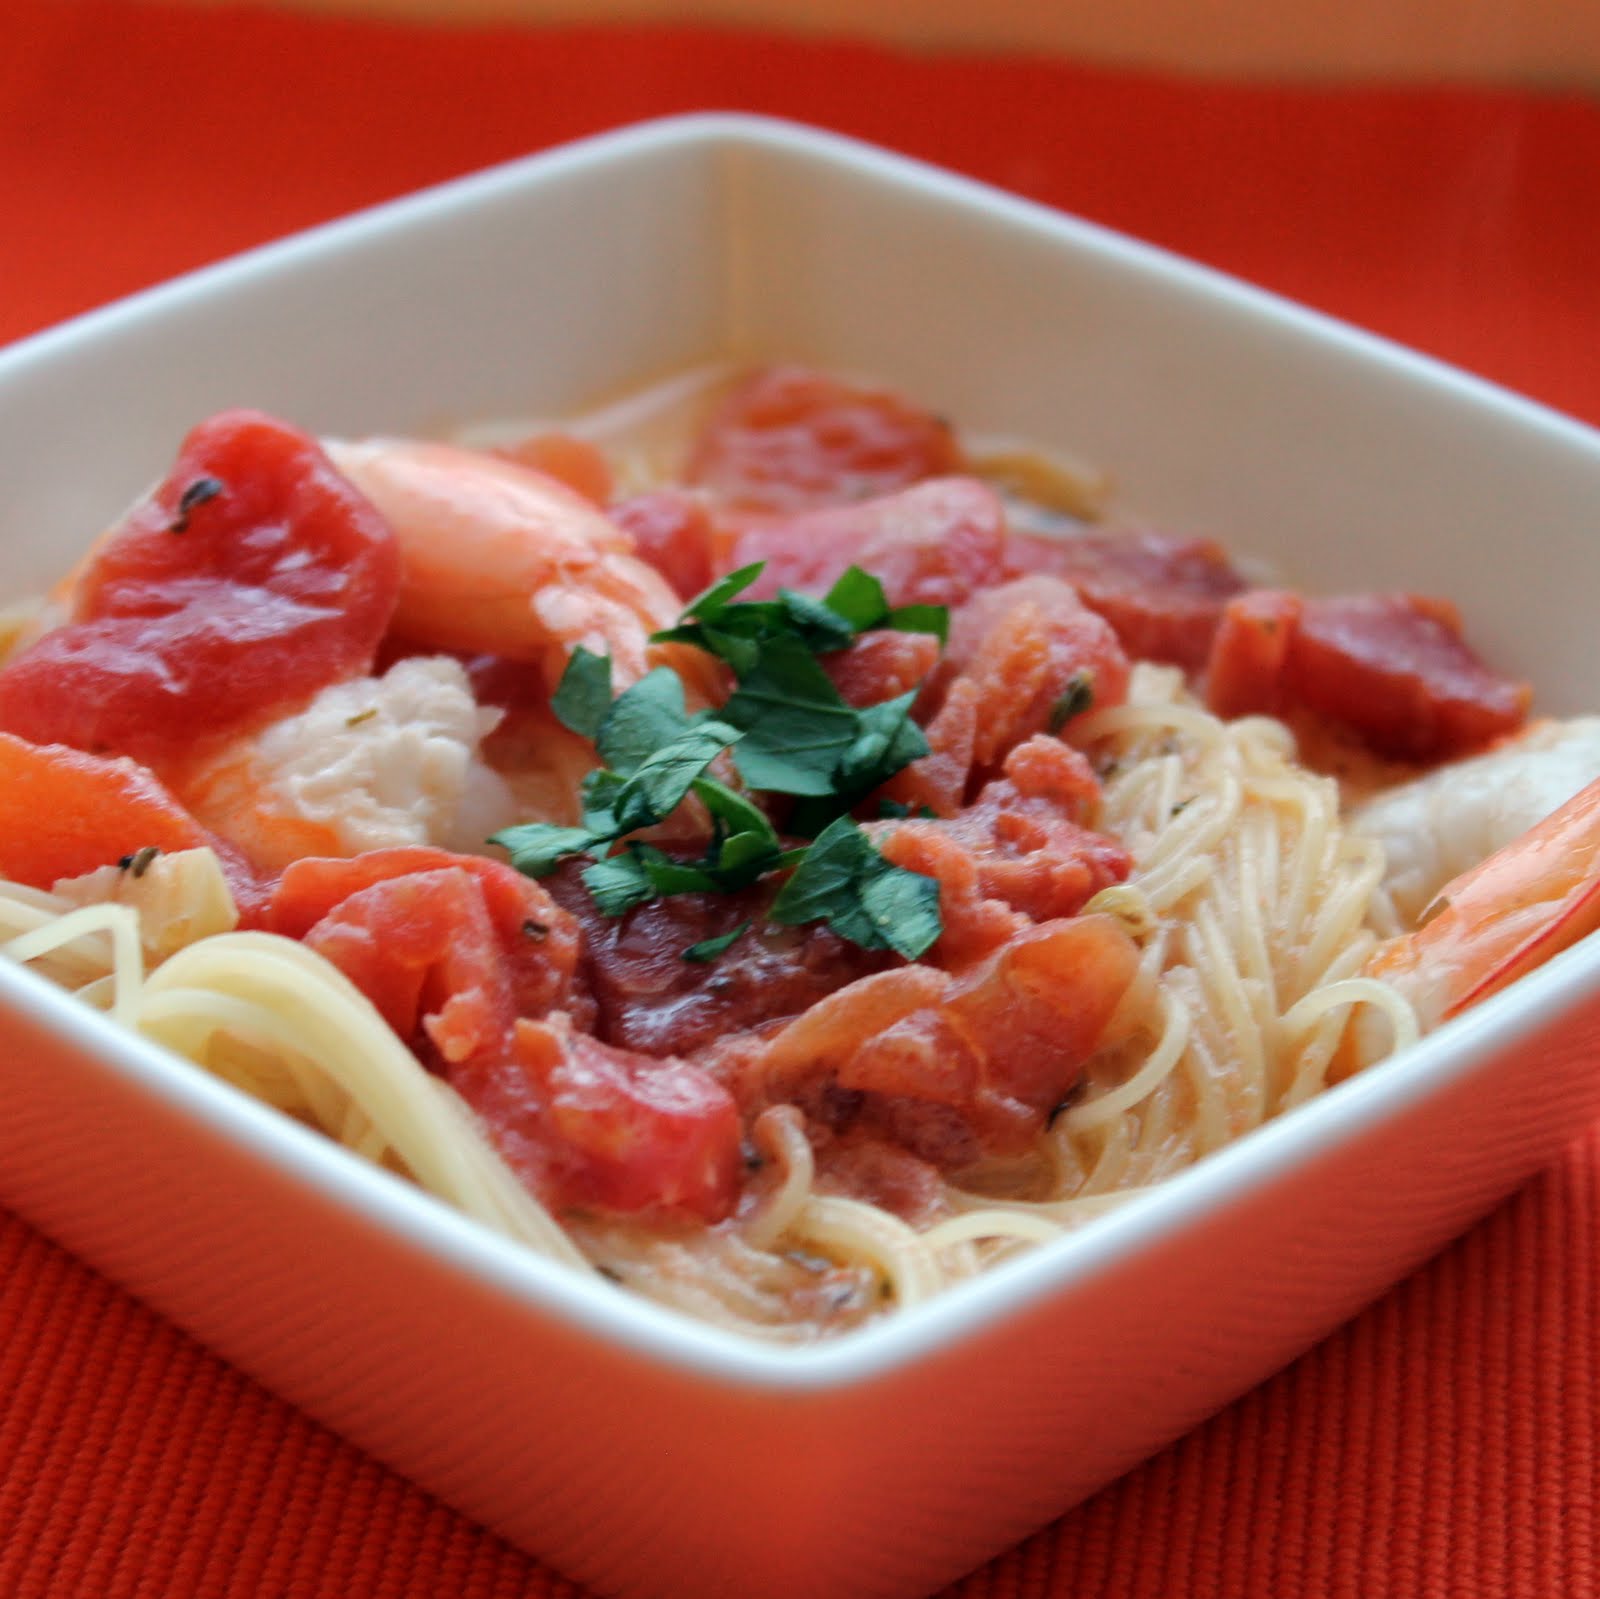 Capellini with Shrimp and Creamy Tomato Sauce | I Can Cook That